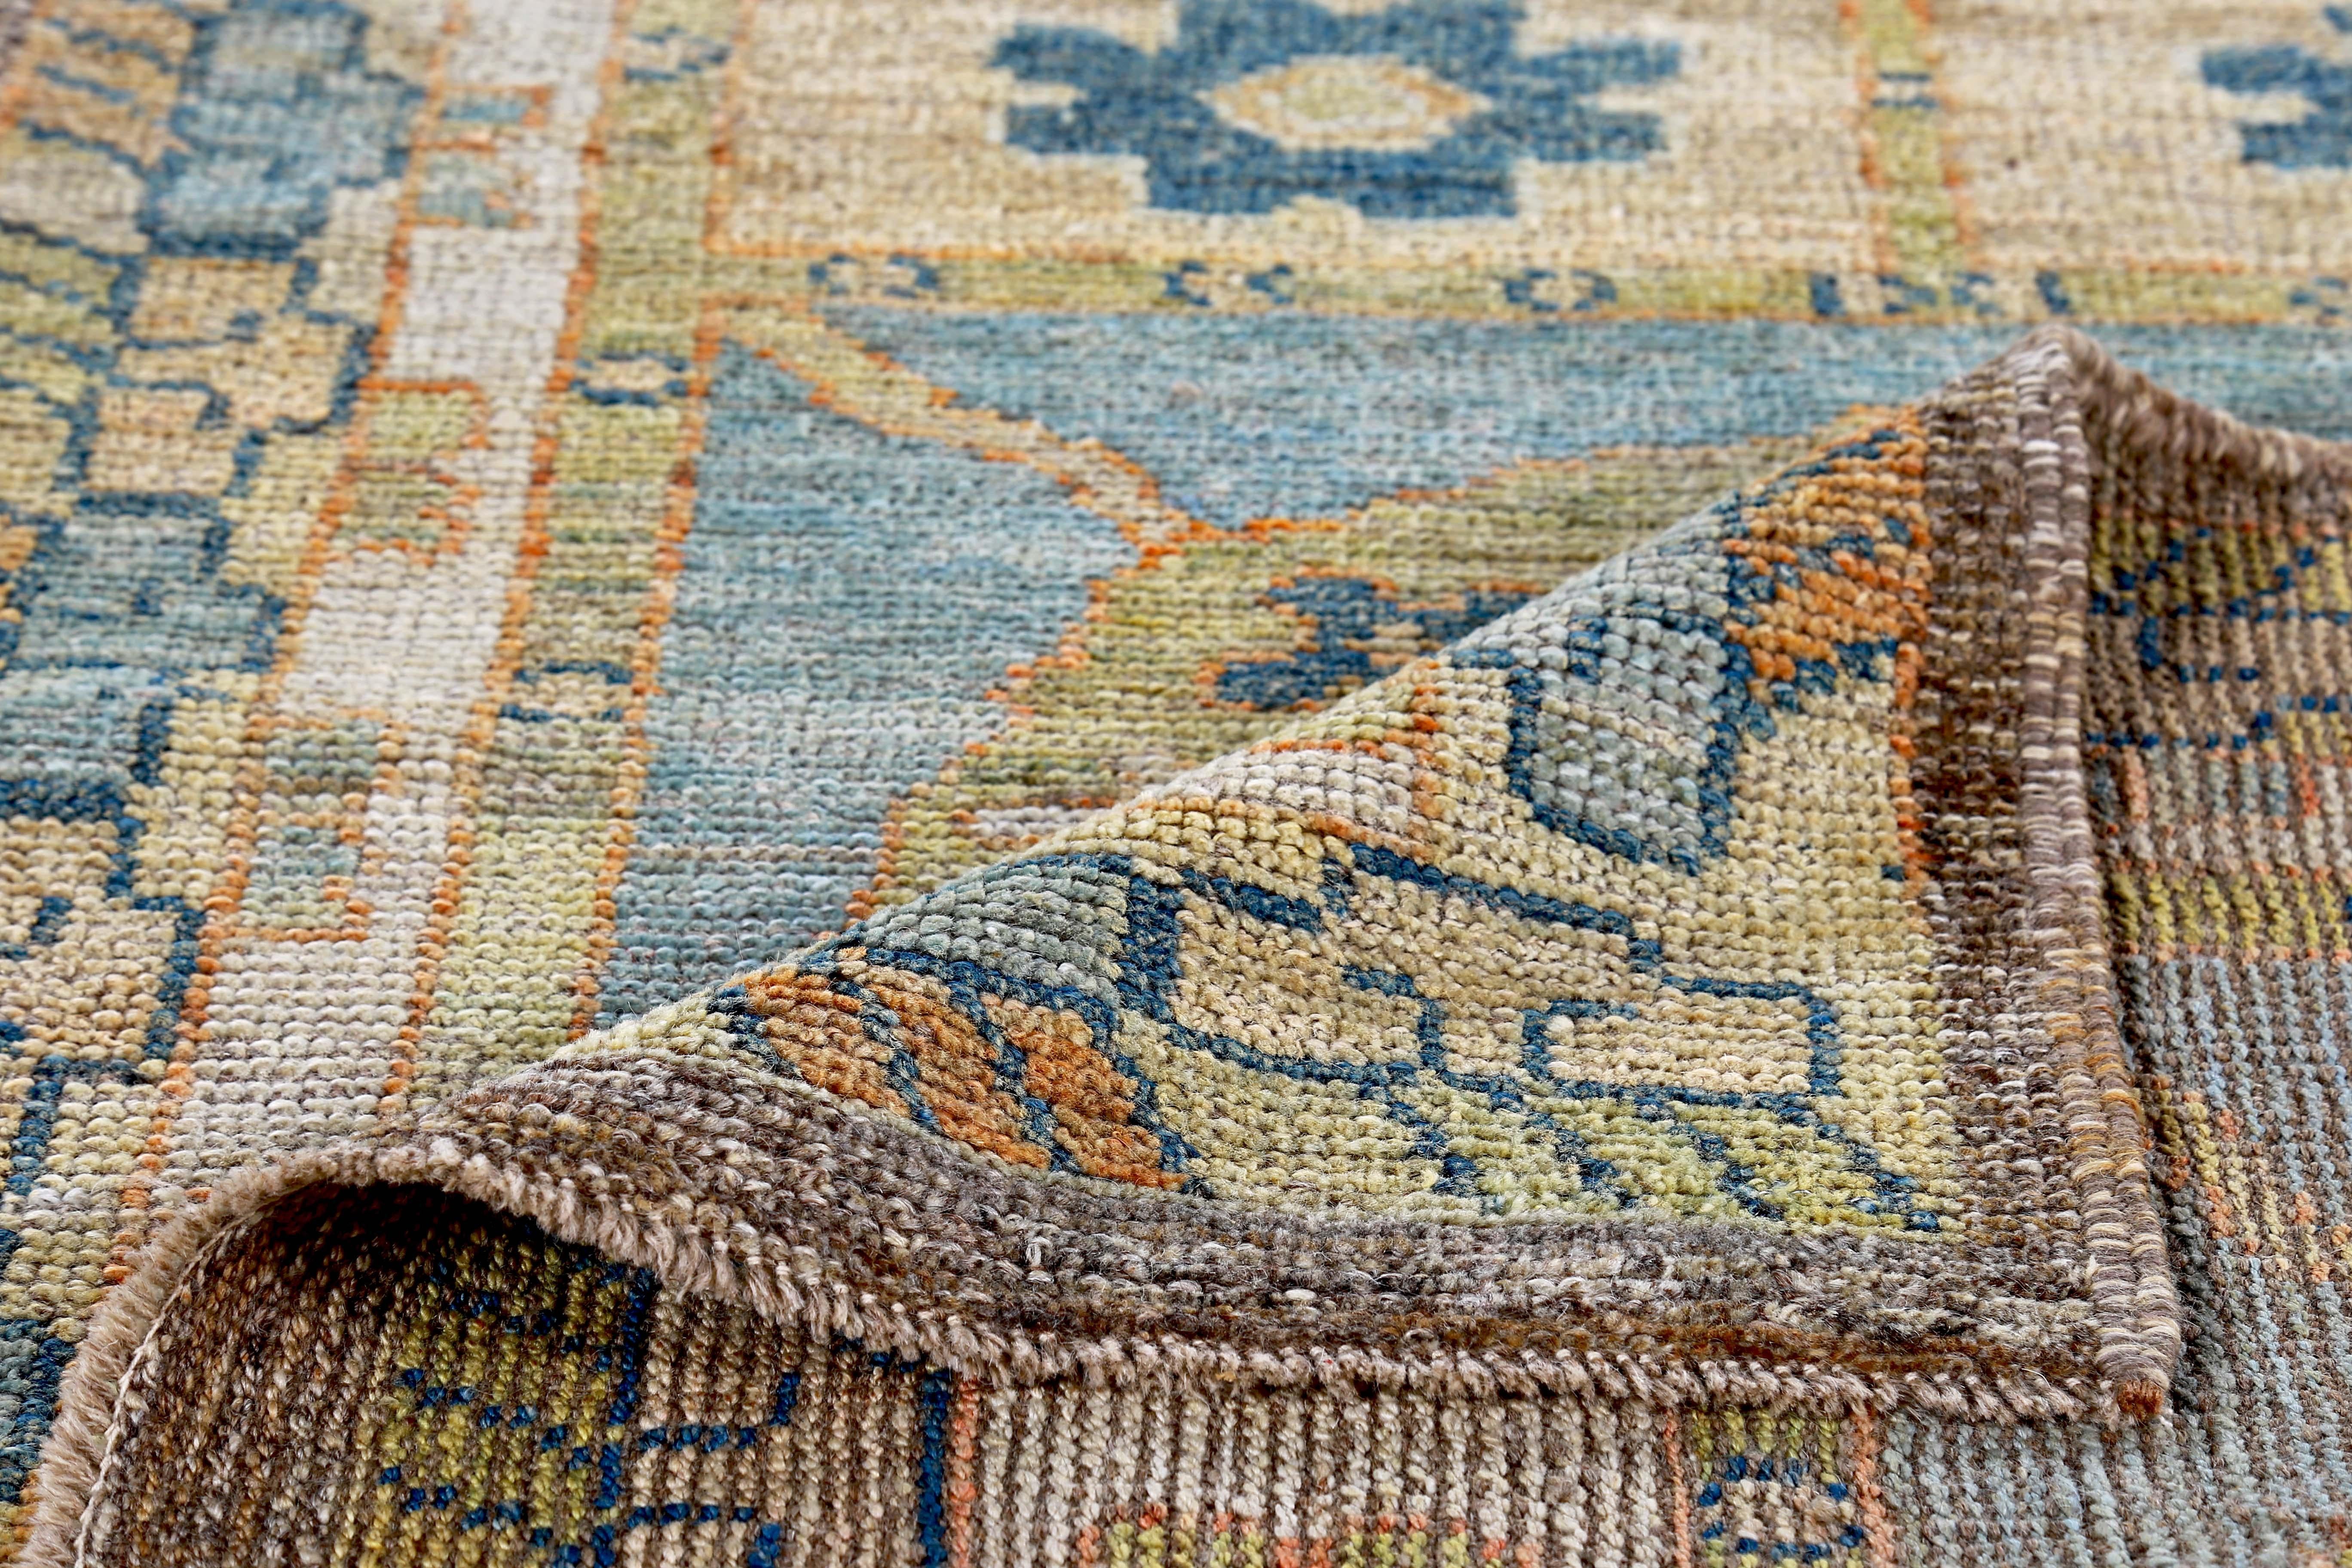 Hand-Woven Turkish Oushak Runner Rug with Blue and Orange Floral Patterns on Beige Field